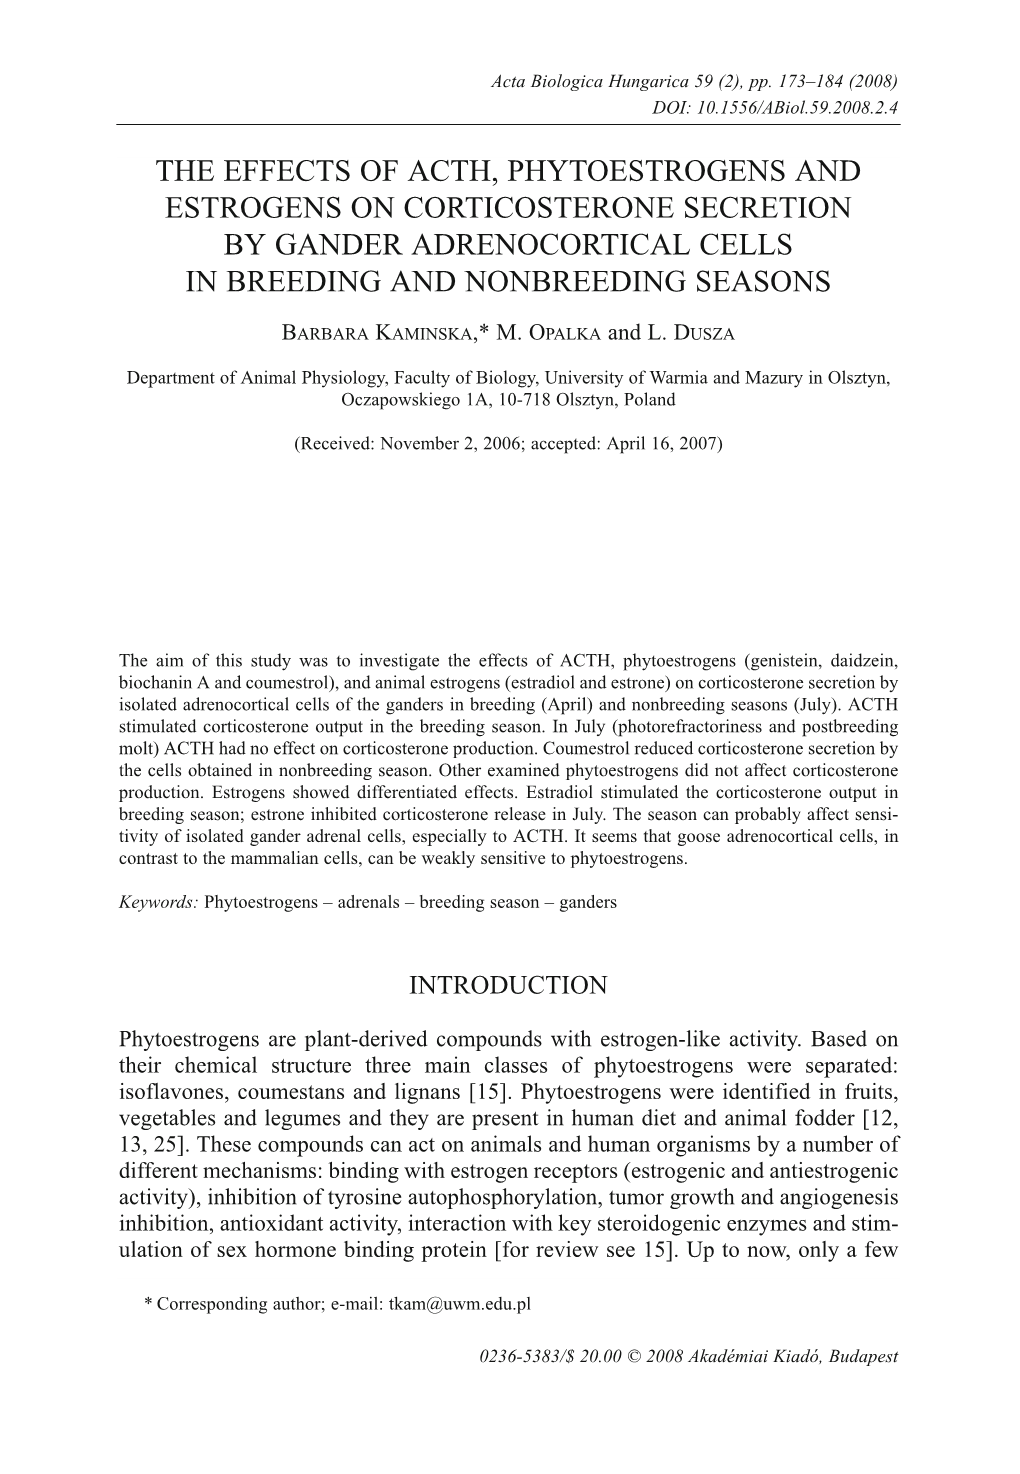 The Effects of Acth, Phytoestrogens and Estrogens on Corticosterone Secretion by Gander Adrenocortical Cells in Breeding and Nonbreeding Seasons